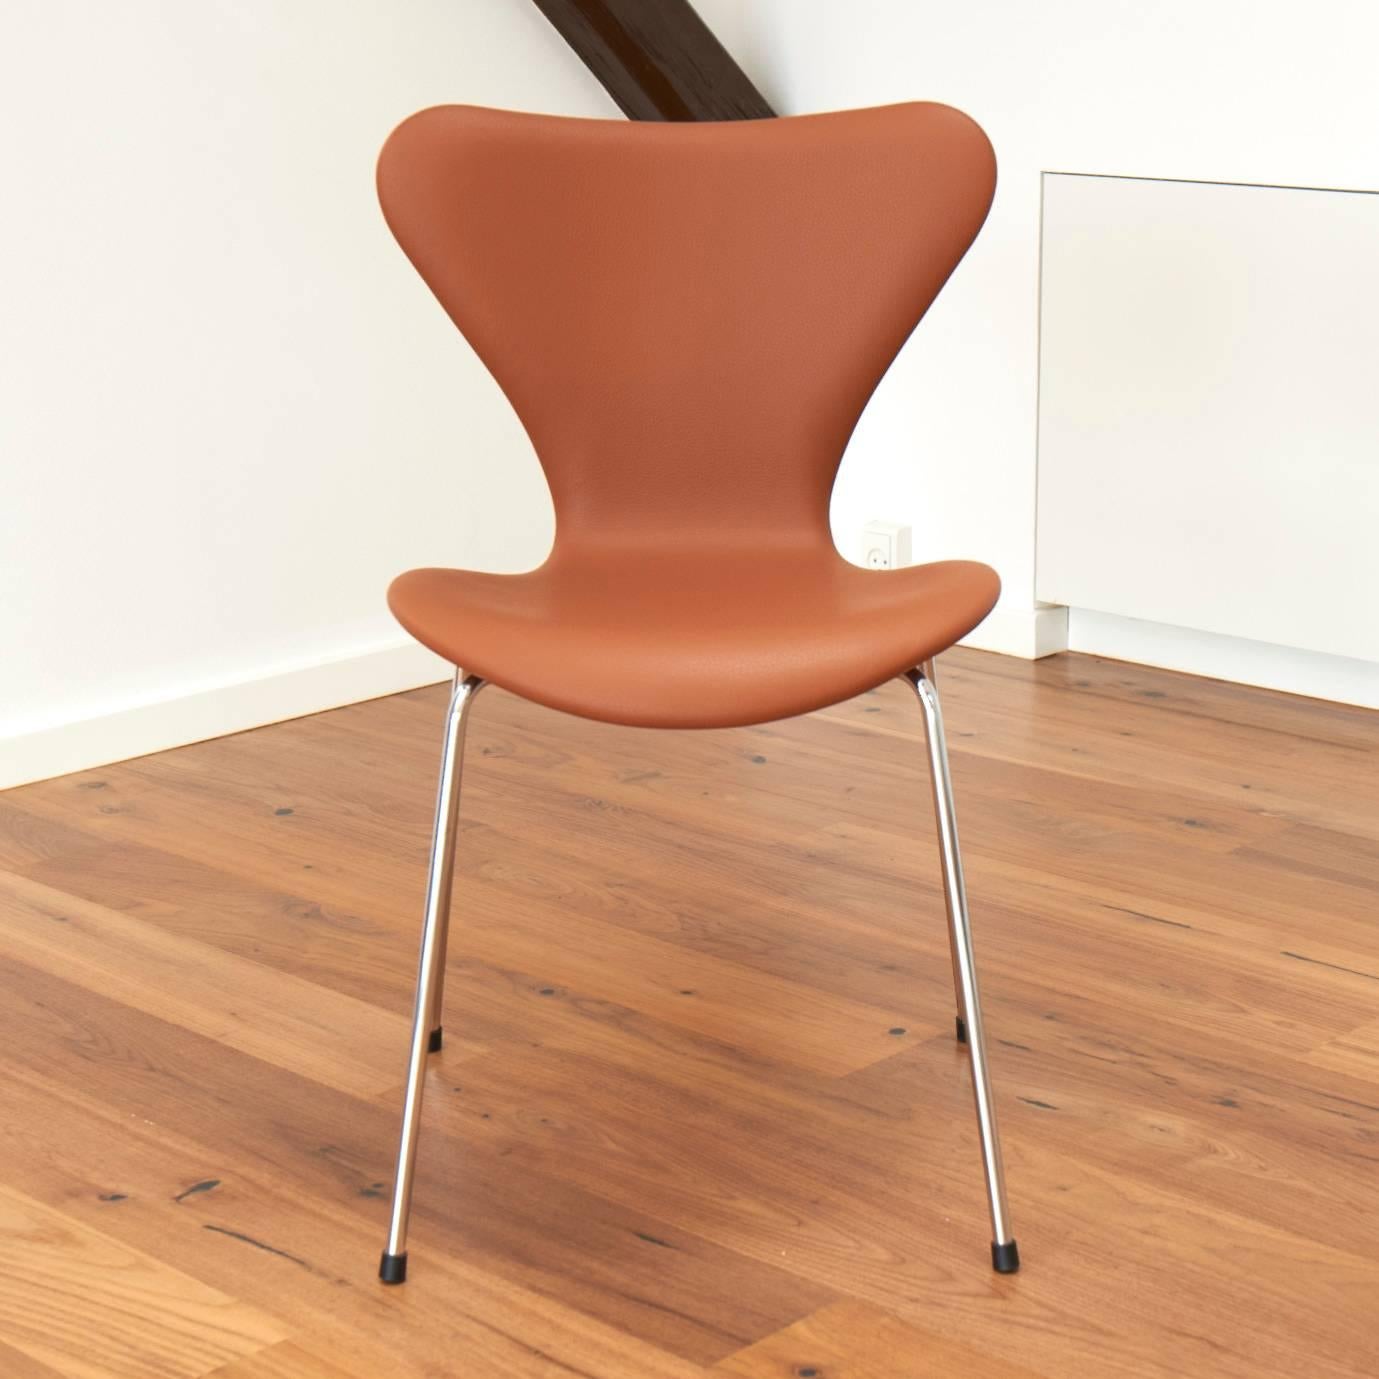 Six pieces. New Arne Jacobsen 3107 chairs in cognac Classic leather.
Manufactured by Fritz Hansen.